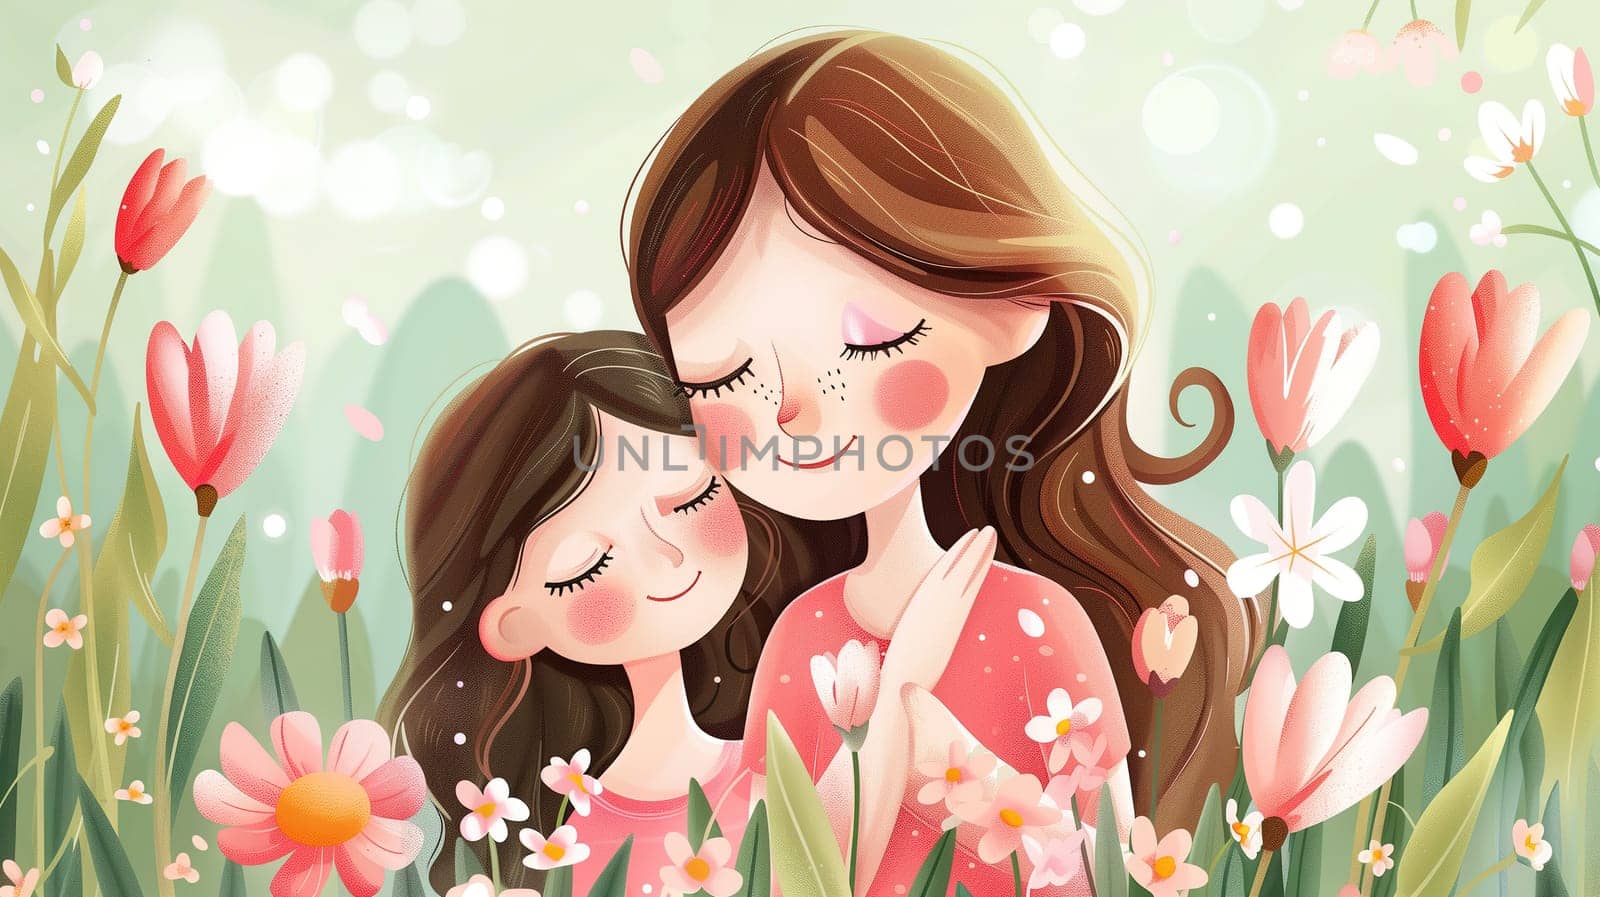 A mother and her daughter embrace tightly in a field filled with colorful flowers, sharing a moment of love and connection on International Mothers Day. The pair stands out against the vibrant backdrop of blooming petals.